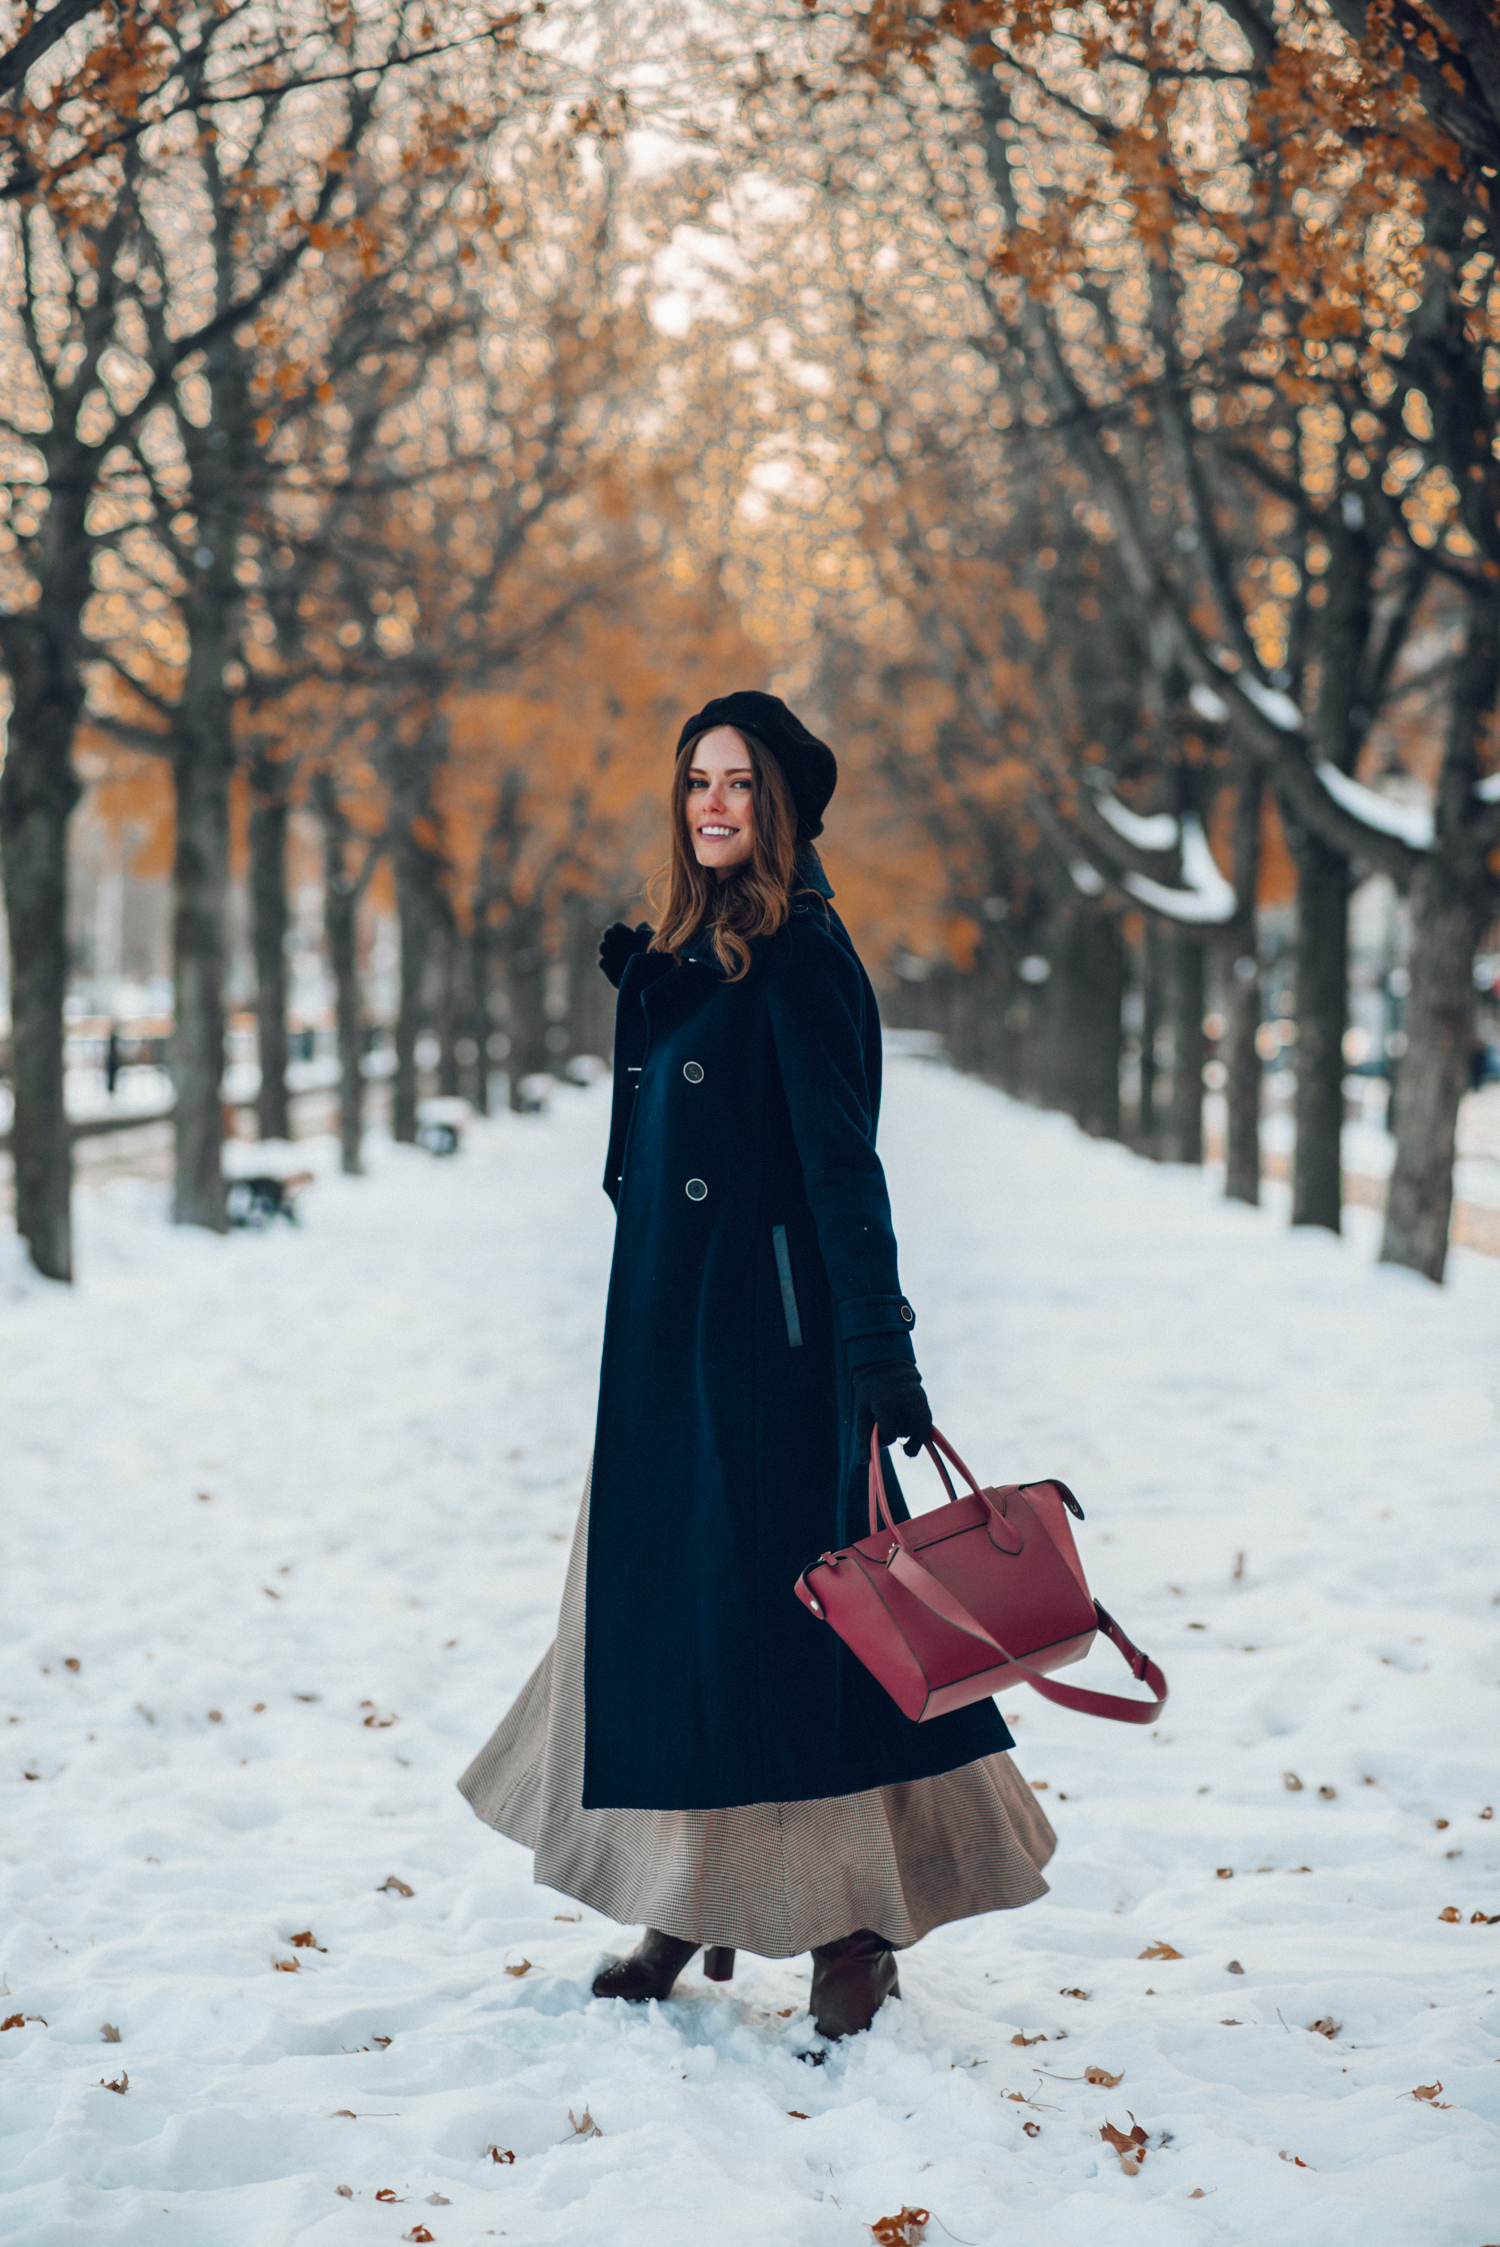 Alyssa Campanella of The A List blog wears Mackage Elodie coat and Christy Dawn Ida skirt for a weekend in Vieux-Montréal